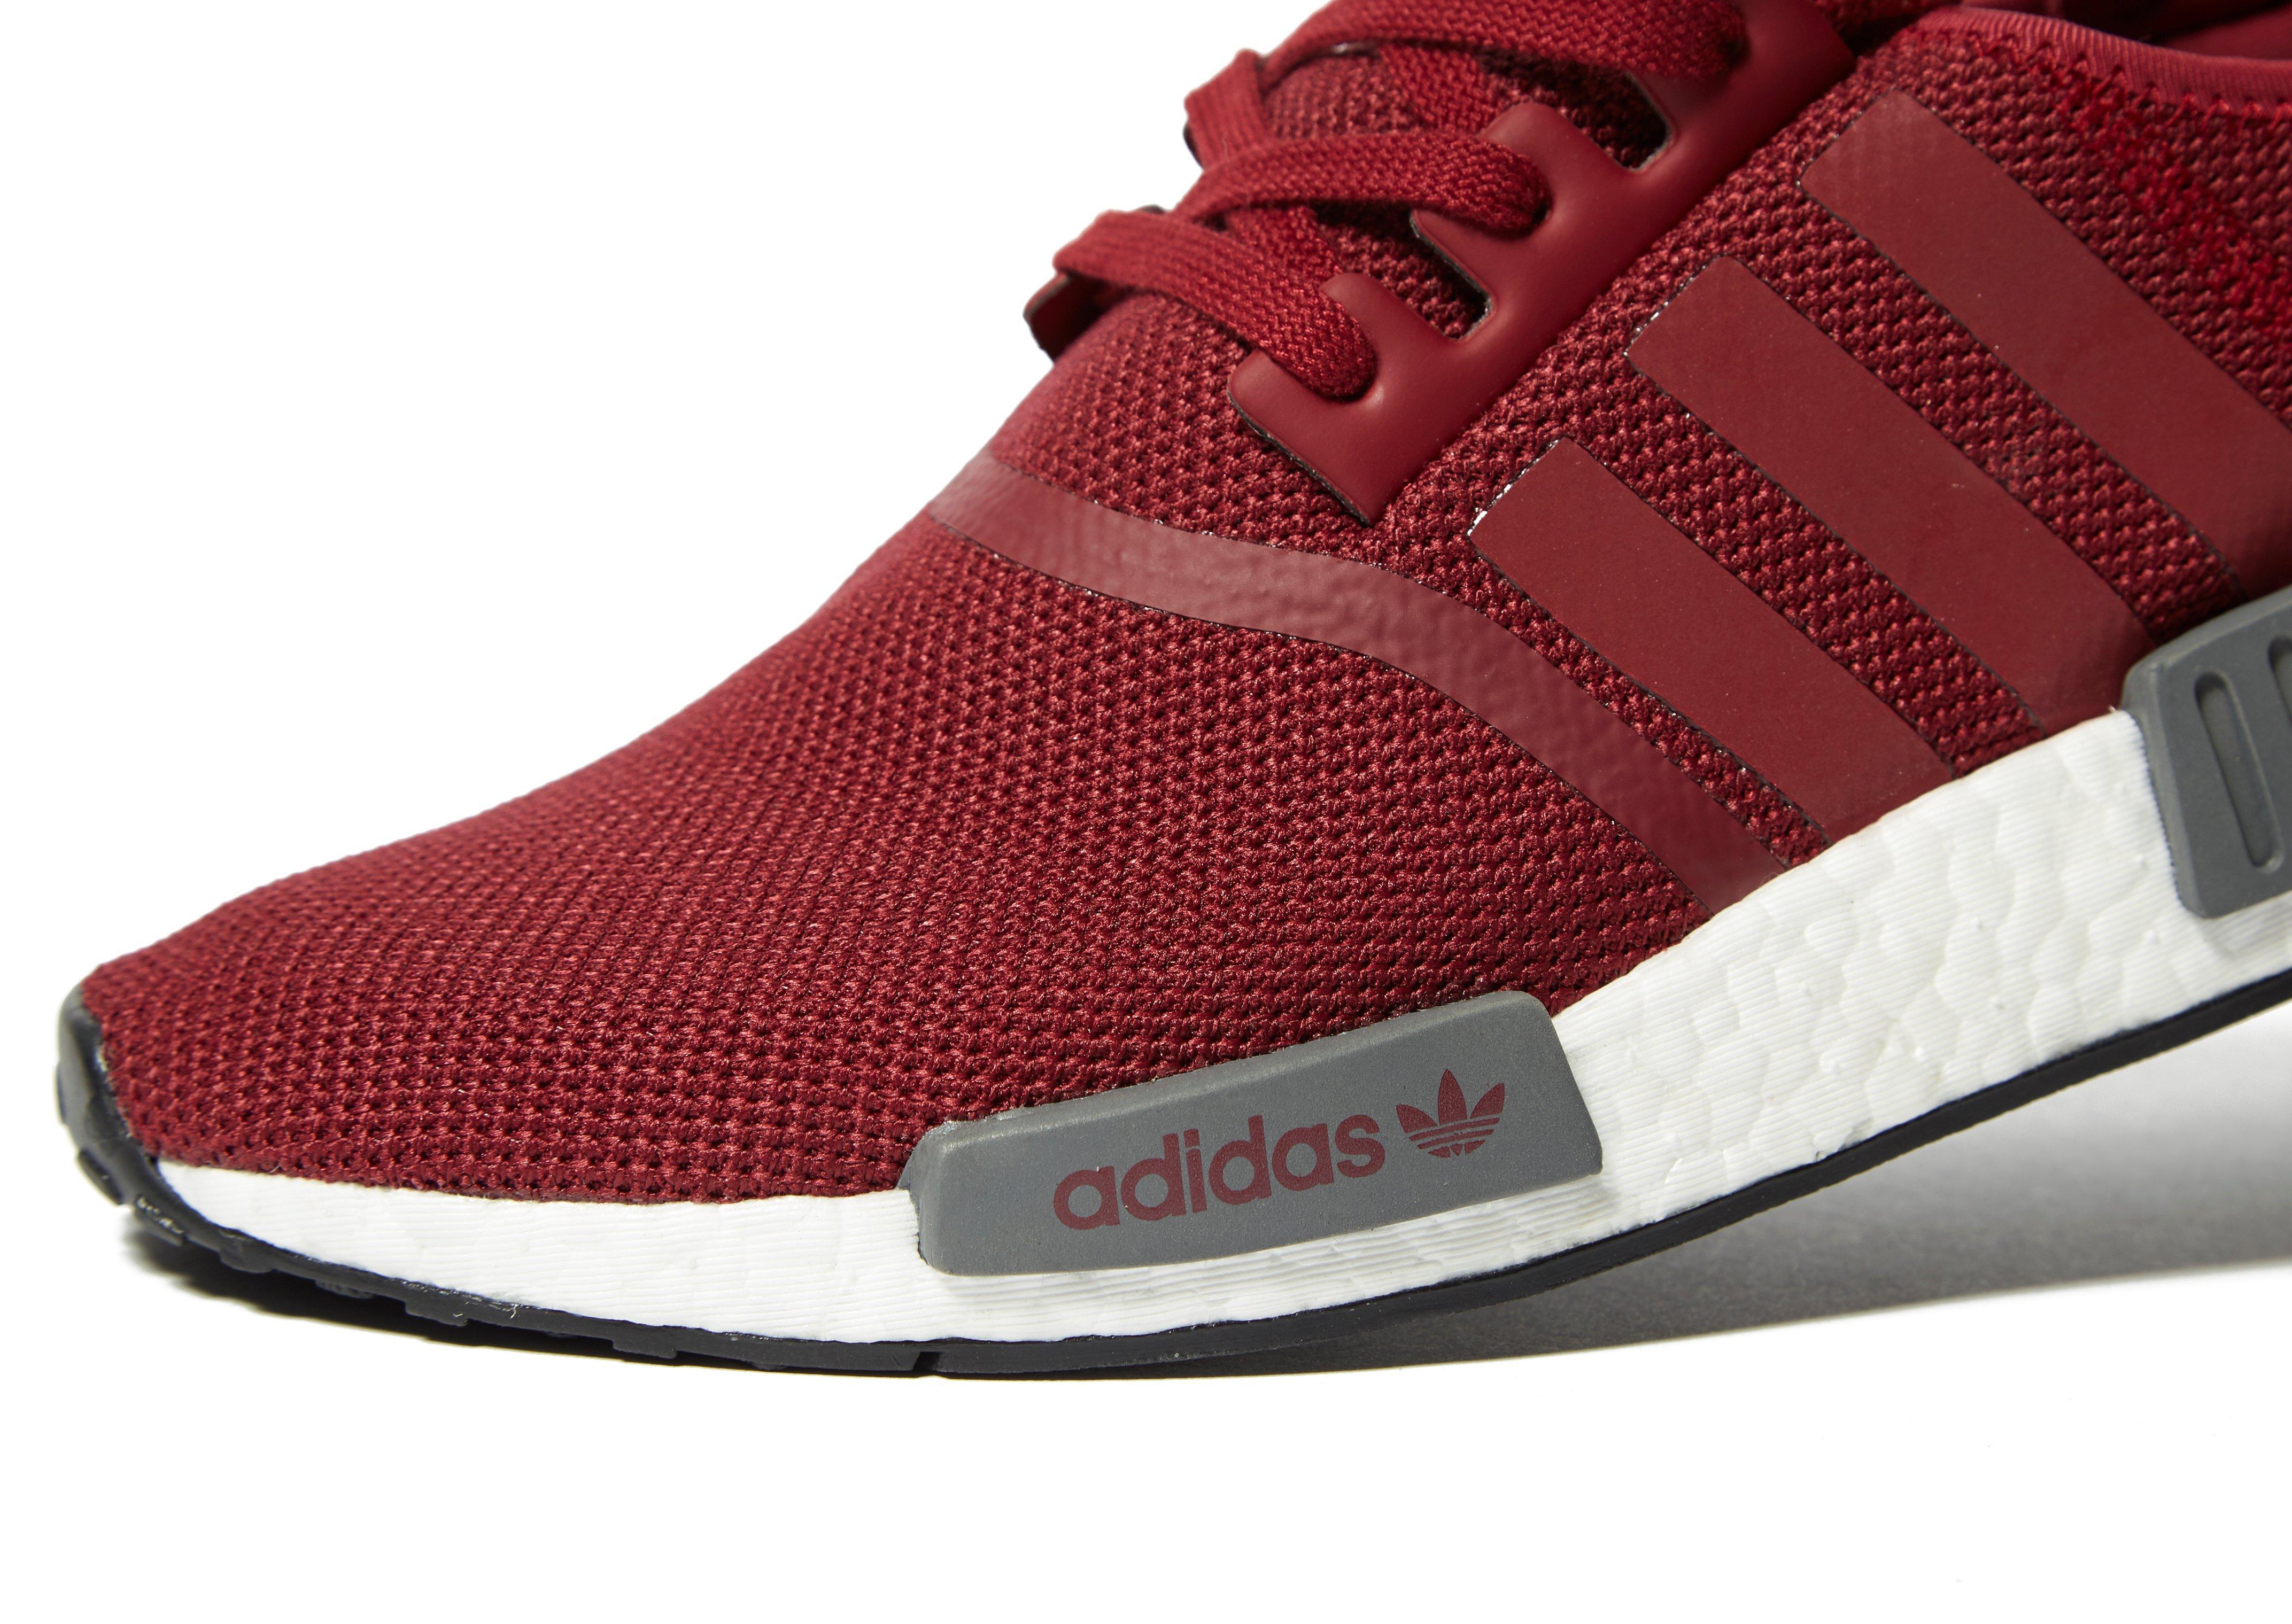  adidas  Originals Synthetic Nmd  R1 in Burgundy Grey Red 